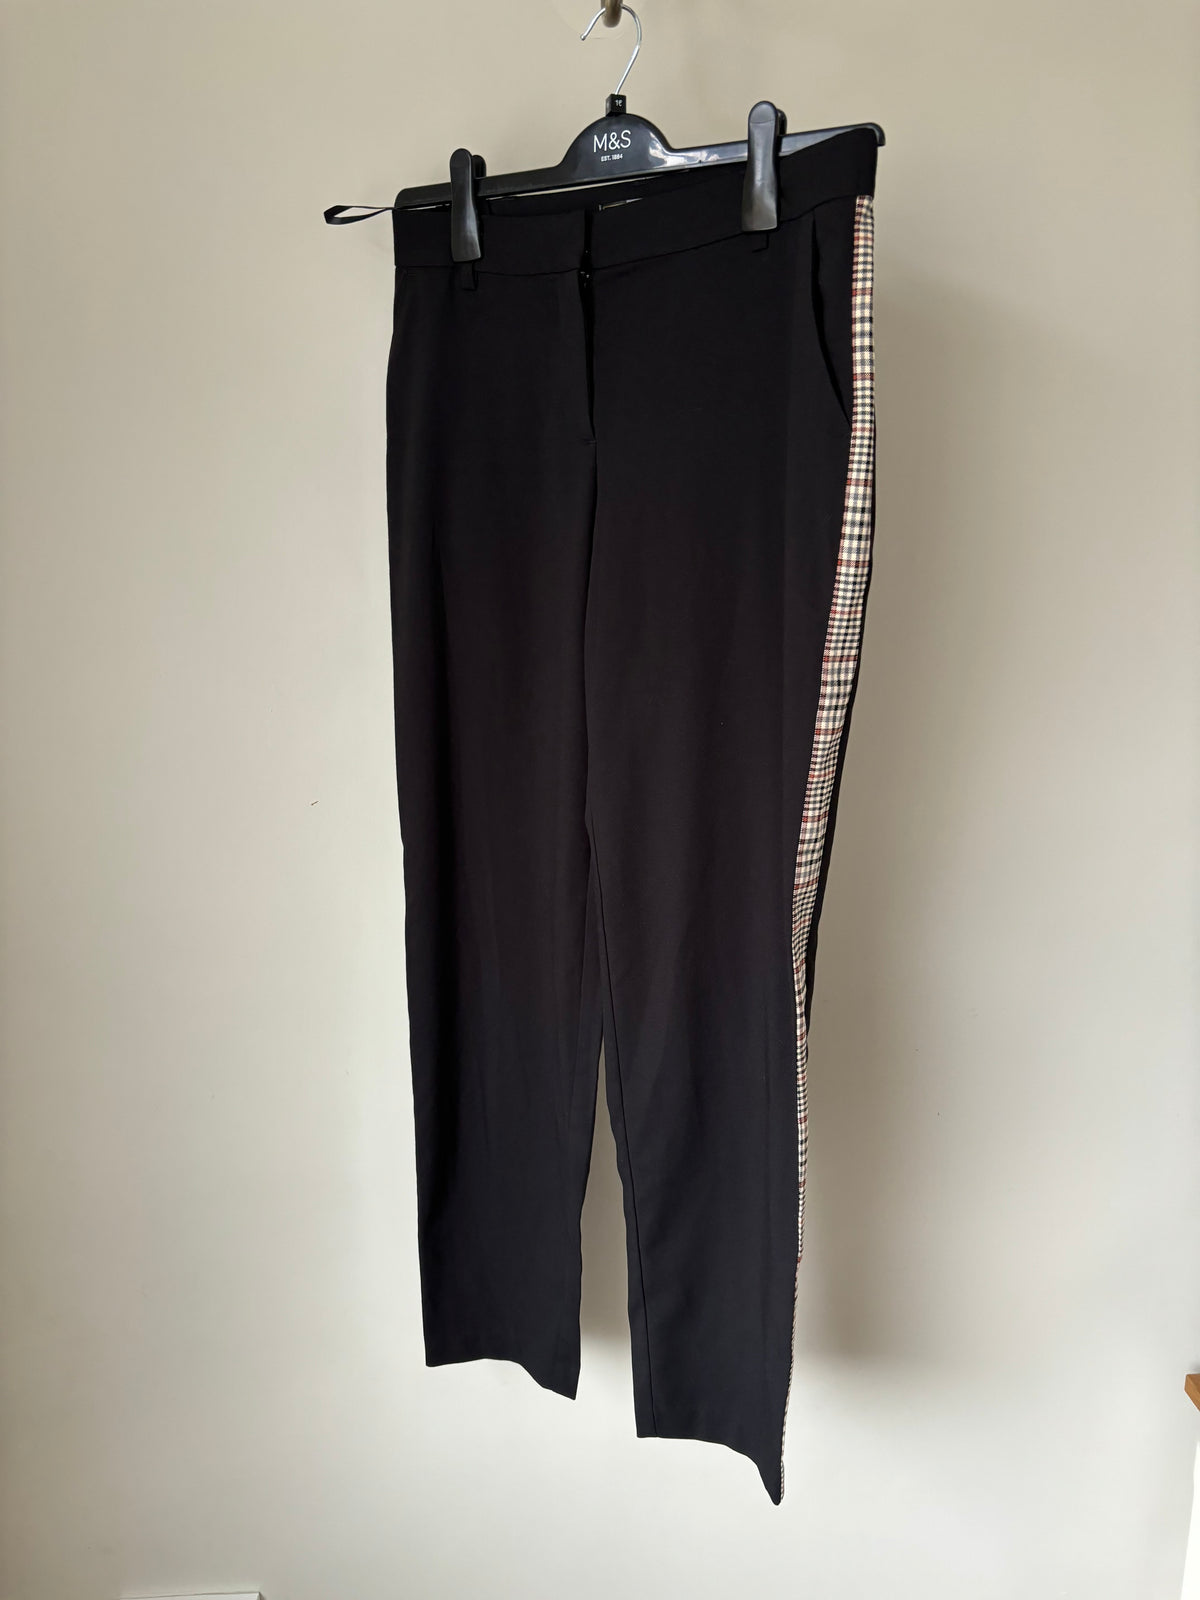 Smart black trousers with side detail by BPC - Size 12